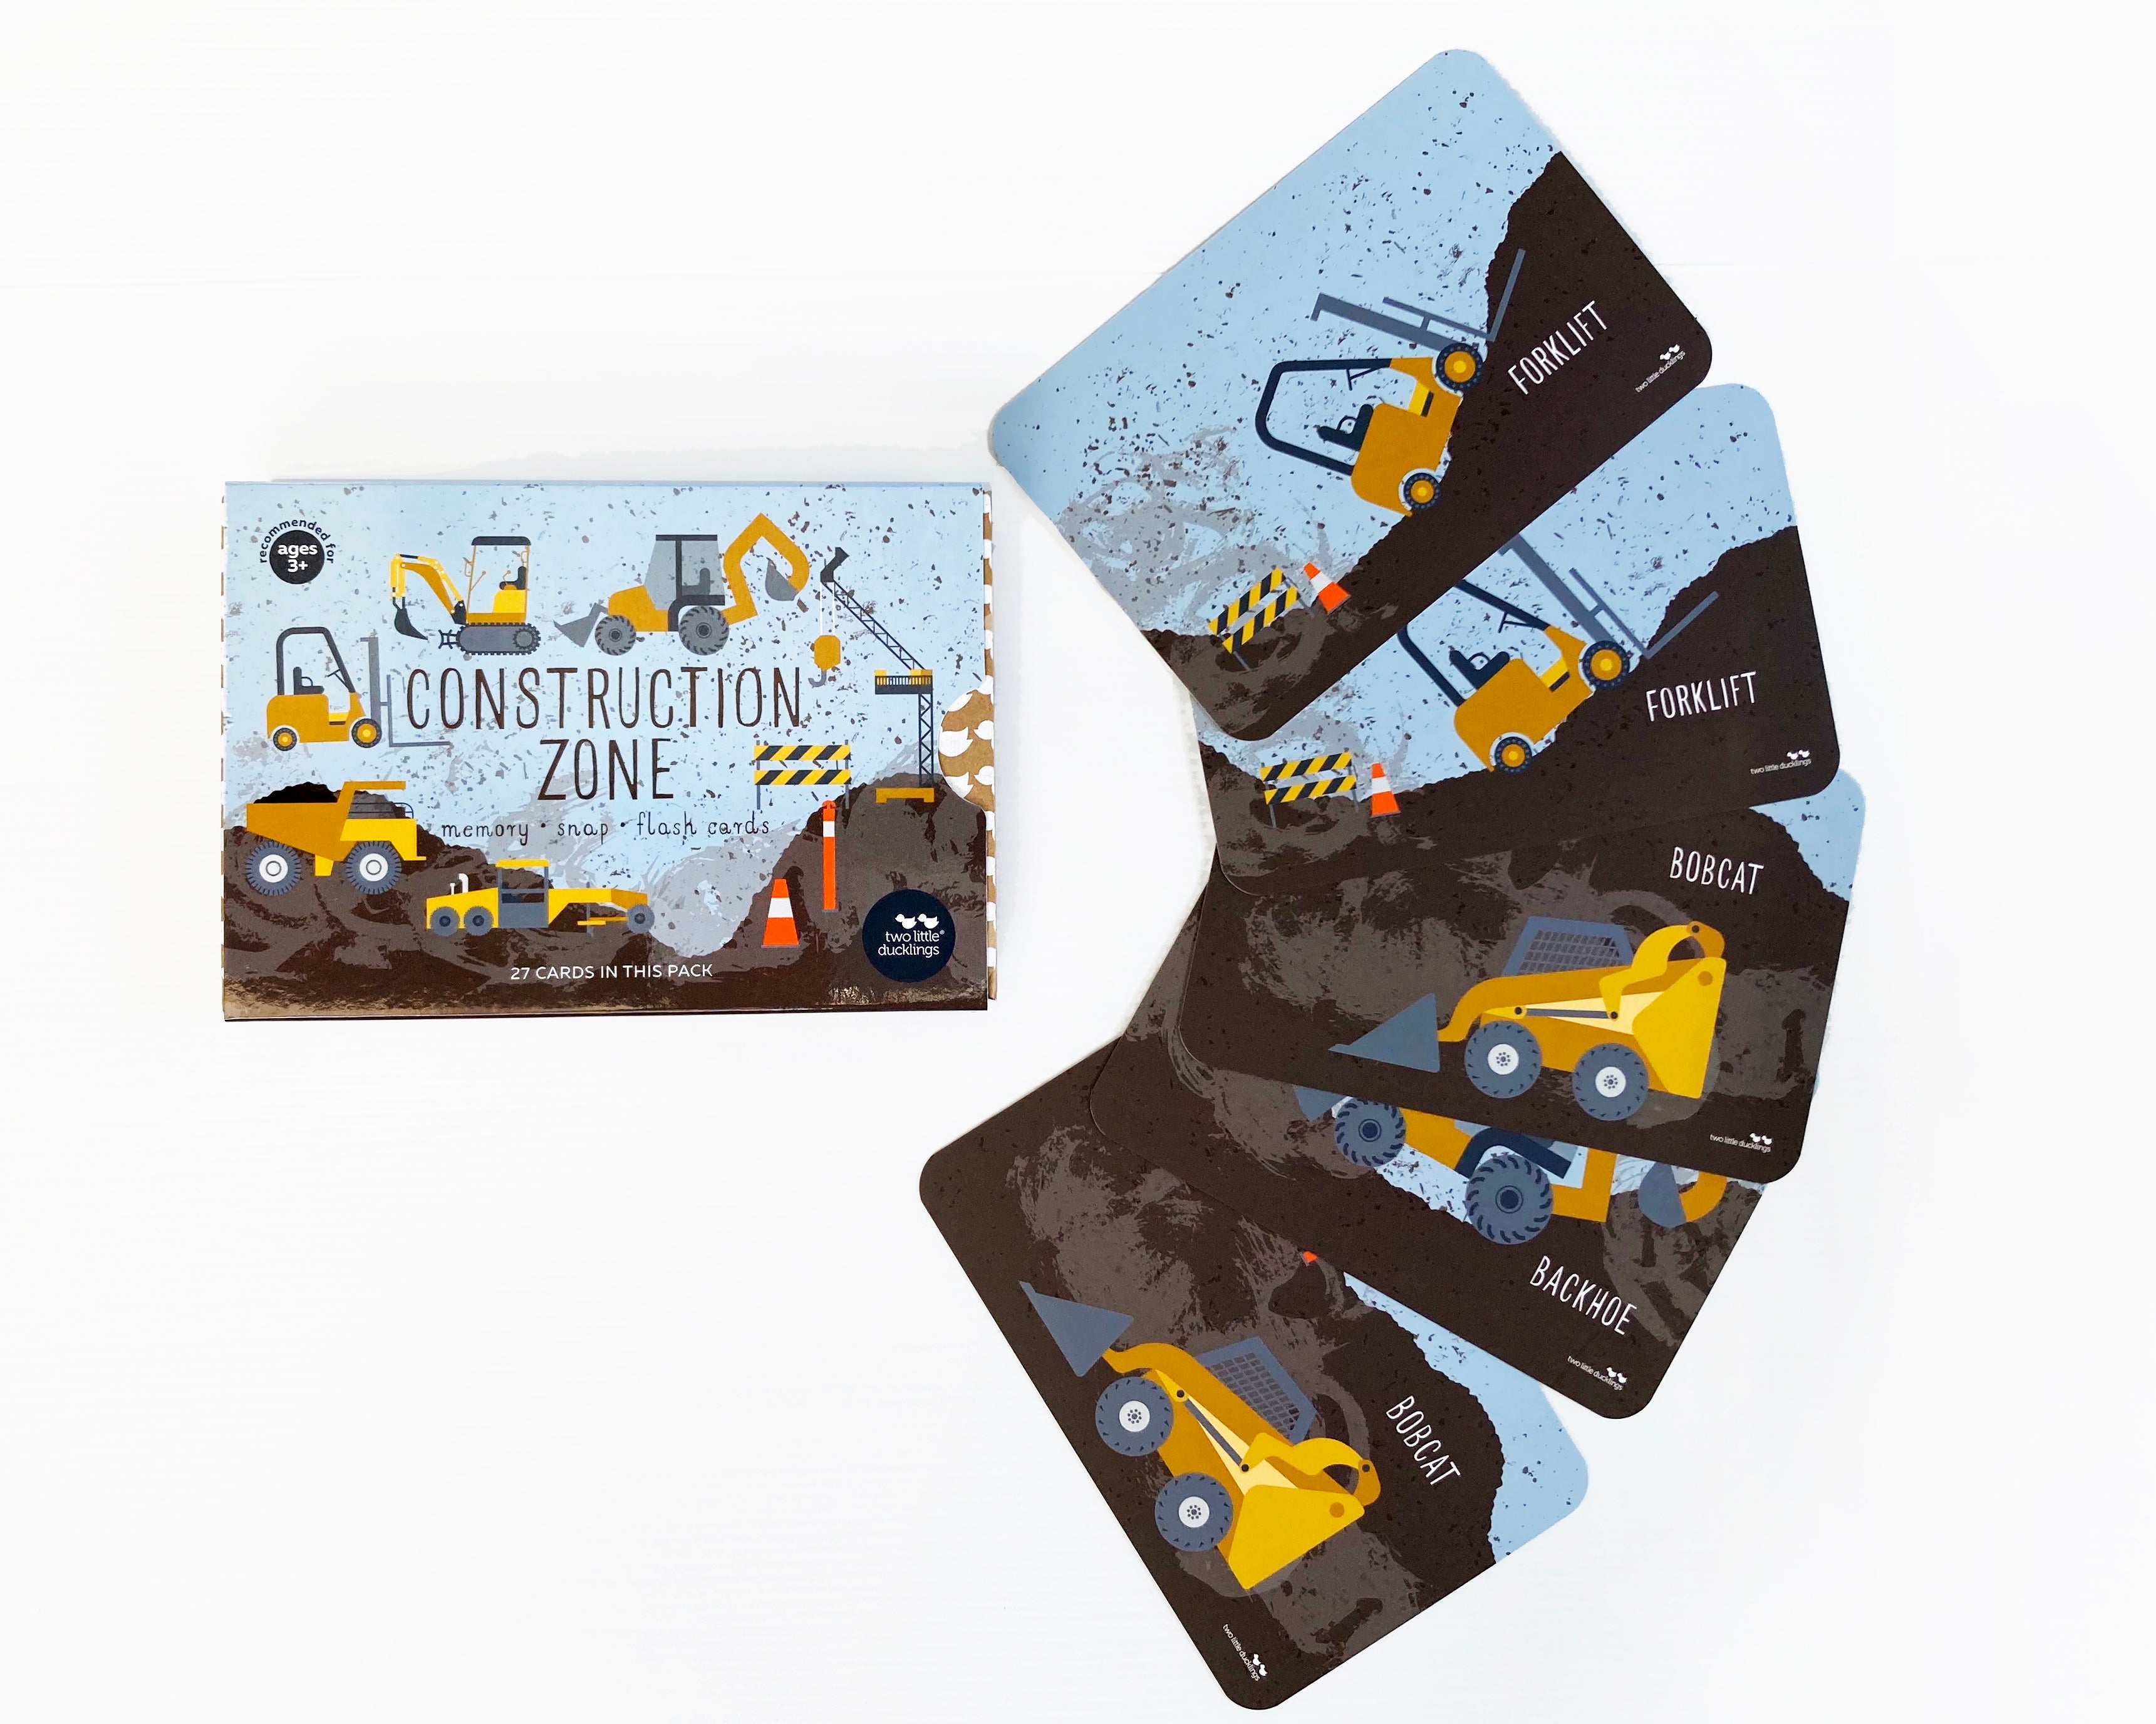 Construction zone flash cards